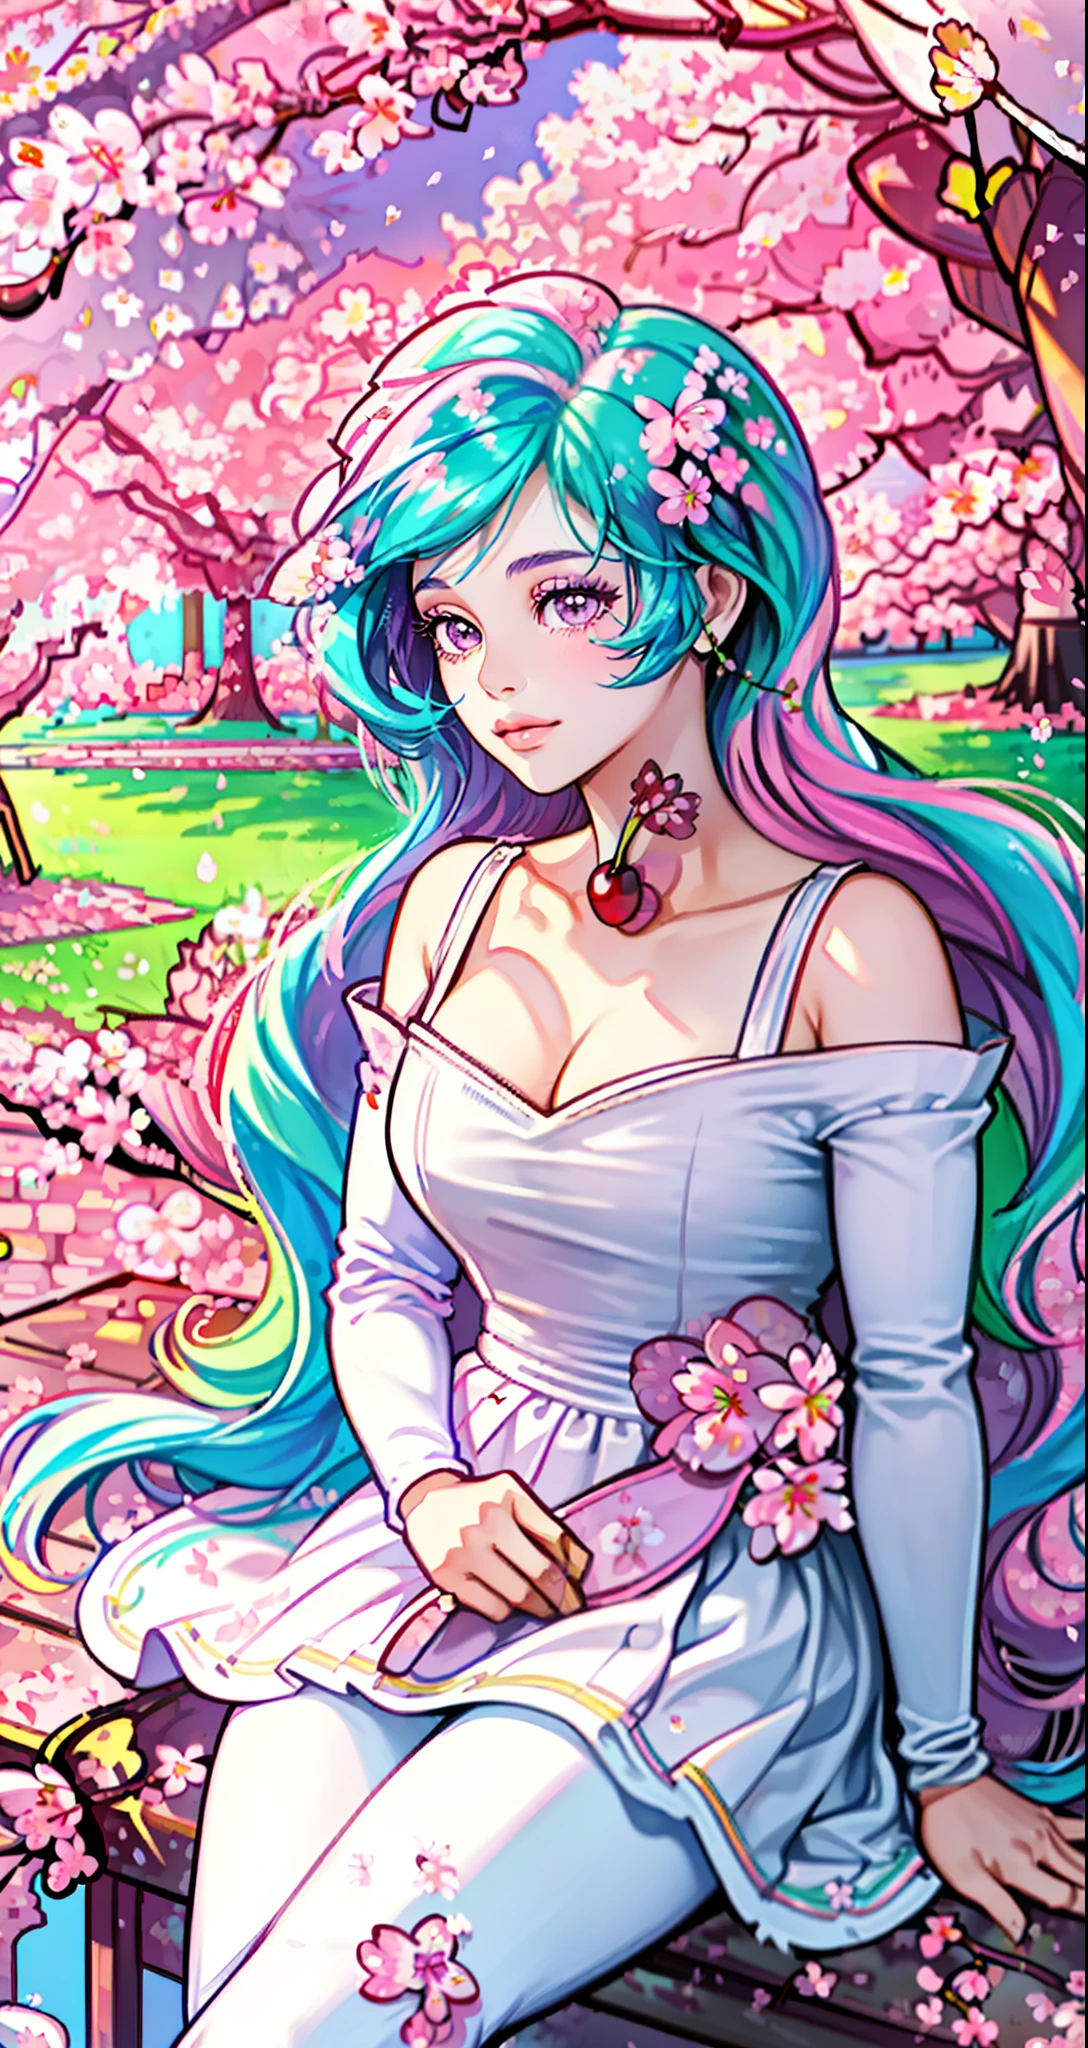 Celestia, celestia from my little pony, celestia in the form of a young woman, big breasts, lush breasts, three tones of hair, blue and pink and green hair, in a garden, pink and purple flowers, solo, one character, white long elegant dress: 1.5, long sleeves, thin, pink eyes, gentle smile, beautiful detailed garden: 1.5, under a trees, ((jacaranda trees: 2.5,)), ((cherry blossom trees: 2.0)), sitting on grass, rose flowers every: 1.5, rose garden: 1.5, so many connected ponds with lily pads and flowers on it beautiful pond: 2.0,, lily pads, sunflower flowers everywhere: 2.0, extremely long hair, sunrise: 2.0, SUNRISE: 2.0, bright glowing golden sky, ethereal sky, white thigh high with fire patterns of it, highly detailed legging, she is sitting by the ponds, reflection on water, bright glowing shimmering eyes, vibrant atmosphere: 1.0, breath taking scenery: 2.0, HIGHLY DETAILED LIGHTING:1.0, dramatic lighting, ((so much foliage)), different varieties of colorful flowers all around her those flowers attract butterflies, highly detailed butterflies, ((one really thin white straight horn on her forehead: 1.0)), two orange cat ears: 1.0, arbours decorated with flowers and bushes